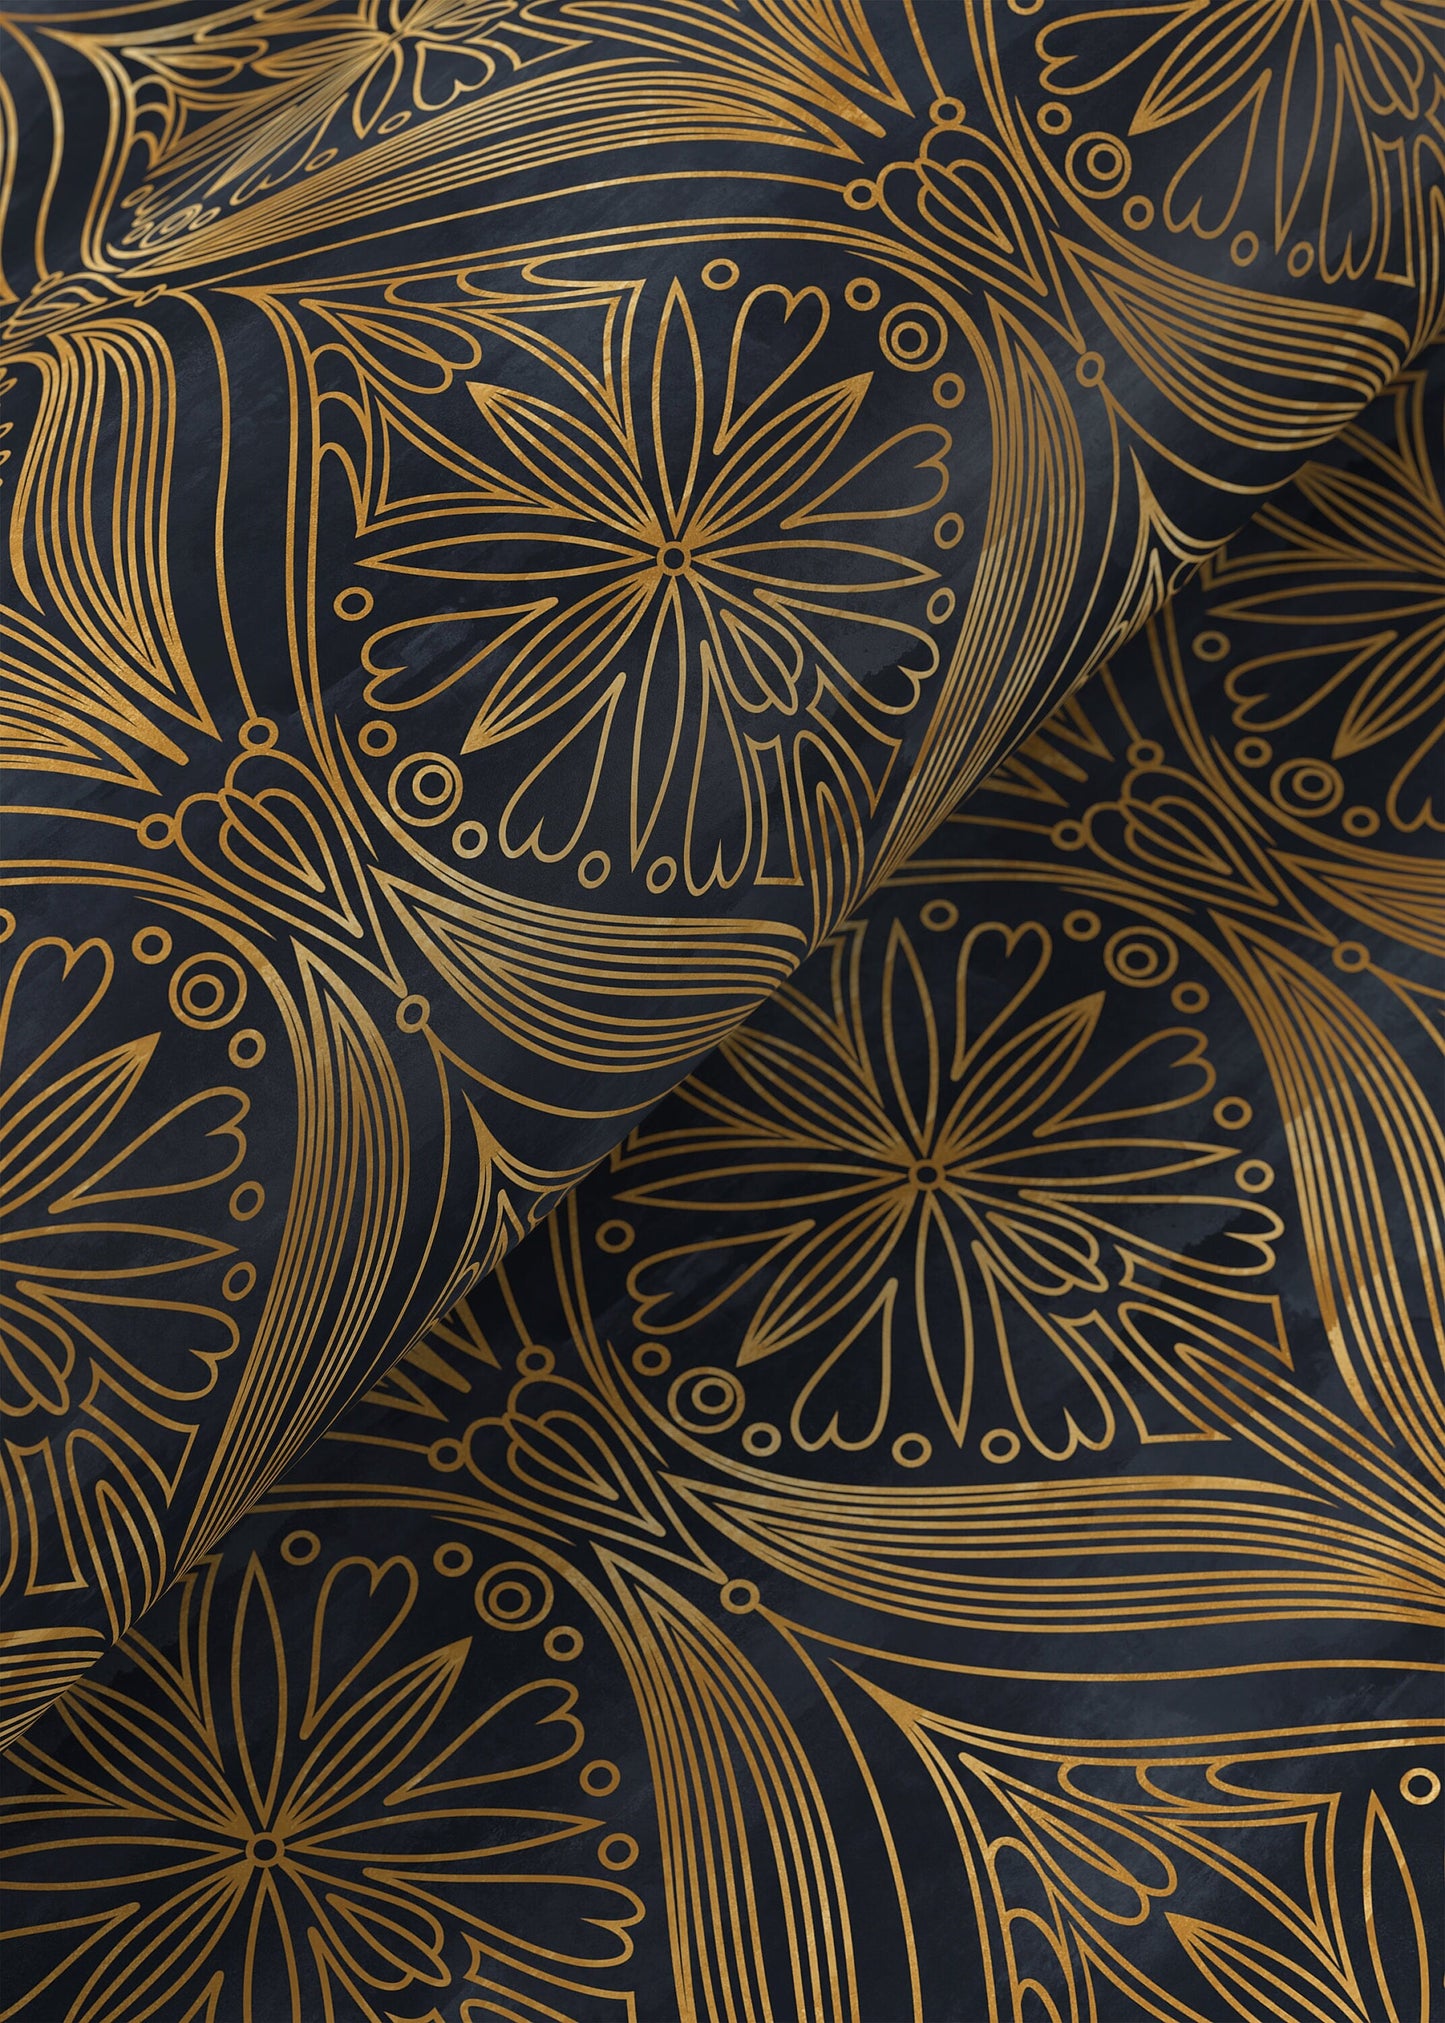 Removable Wallpaper Peel and Stick Wallpaper Wall Paper Wall Mural - Art Deco Black and Non-Metalic Yellow Gold Color - B520